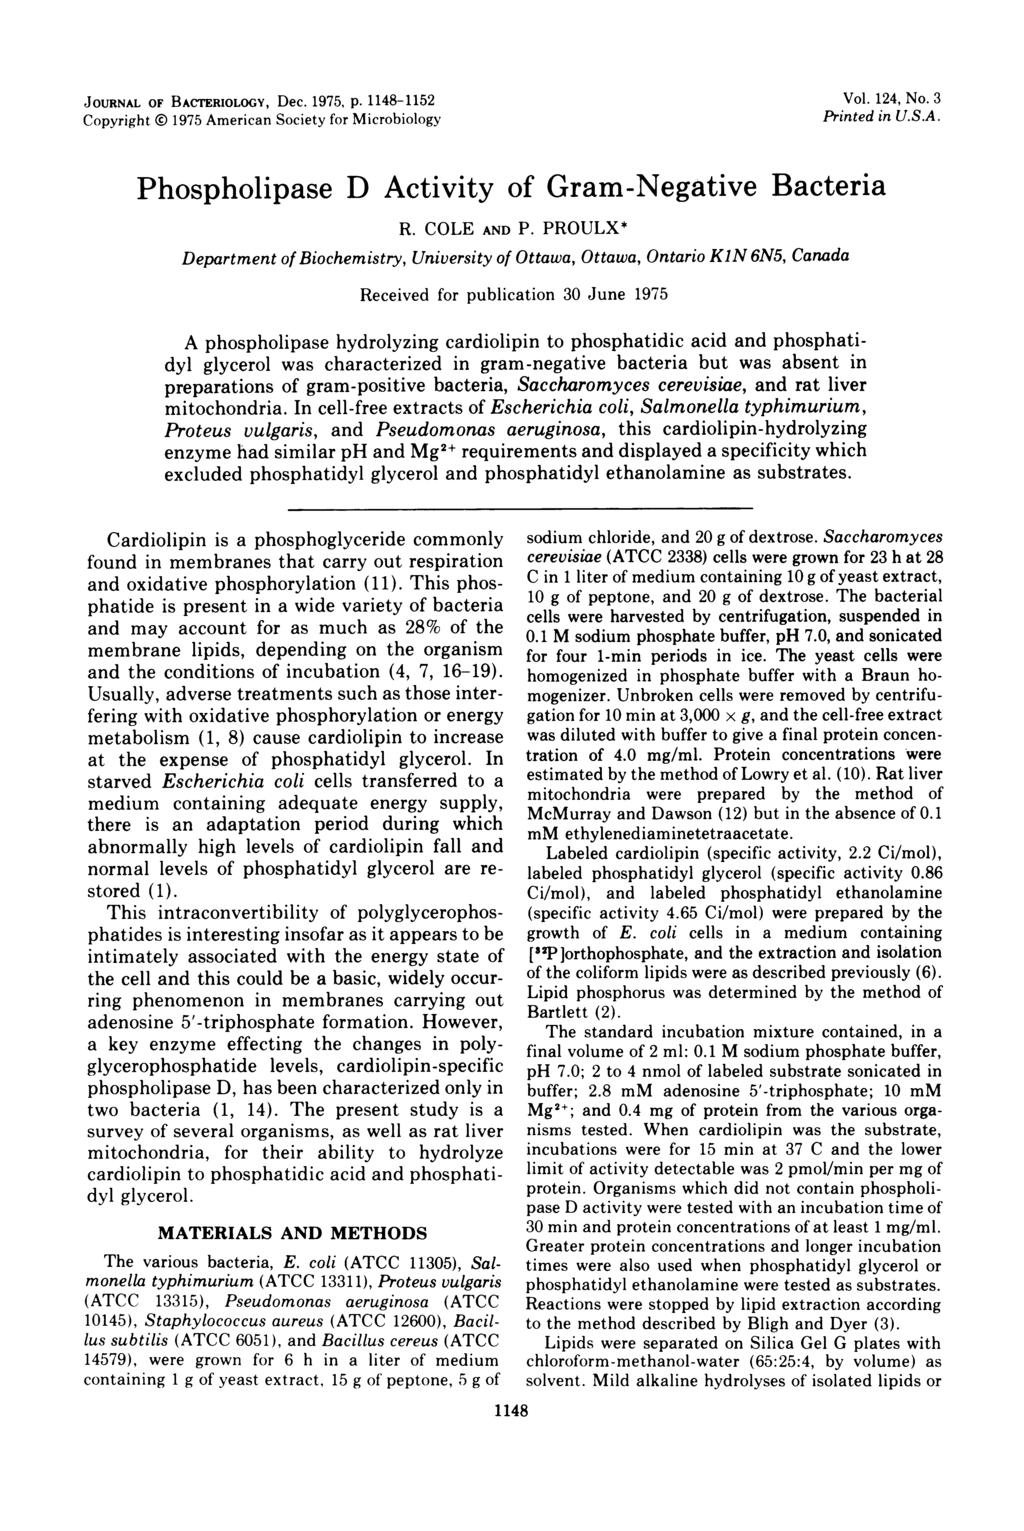 JOURNAL OF BACTERIOLOGY, Dec. 1975, p. 1148-1152 Copyright 1975 American Society for Microbiology Vol. 124, No. 3 Printed in U.S.A. Phospholipase D Activity of Gram-Negative Bacteria R. COLE AND P.